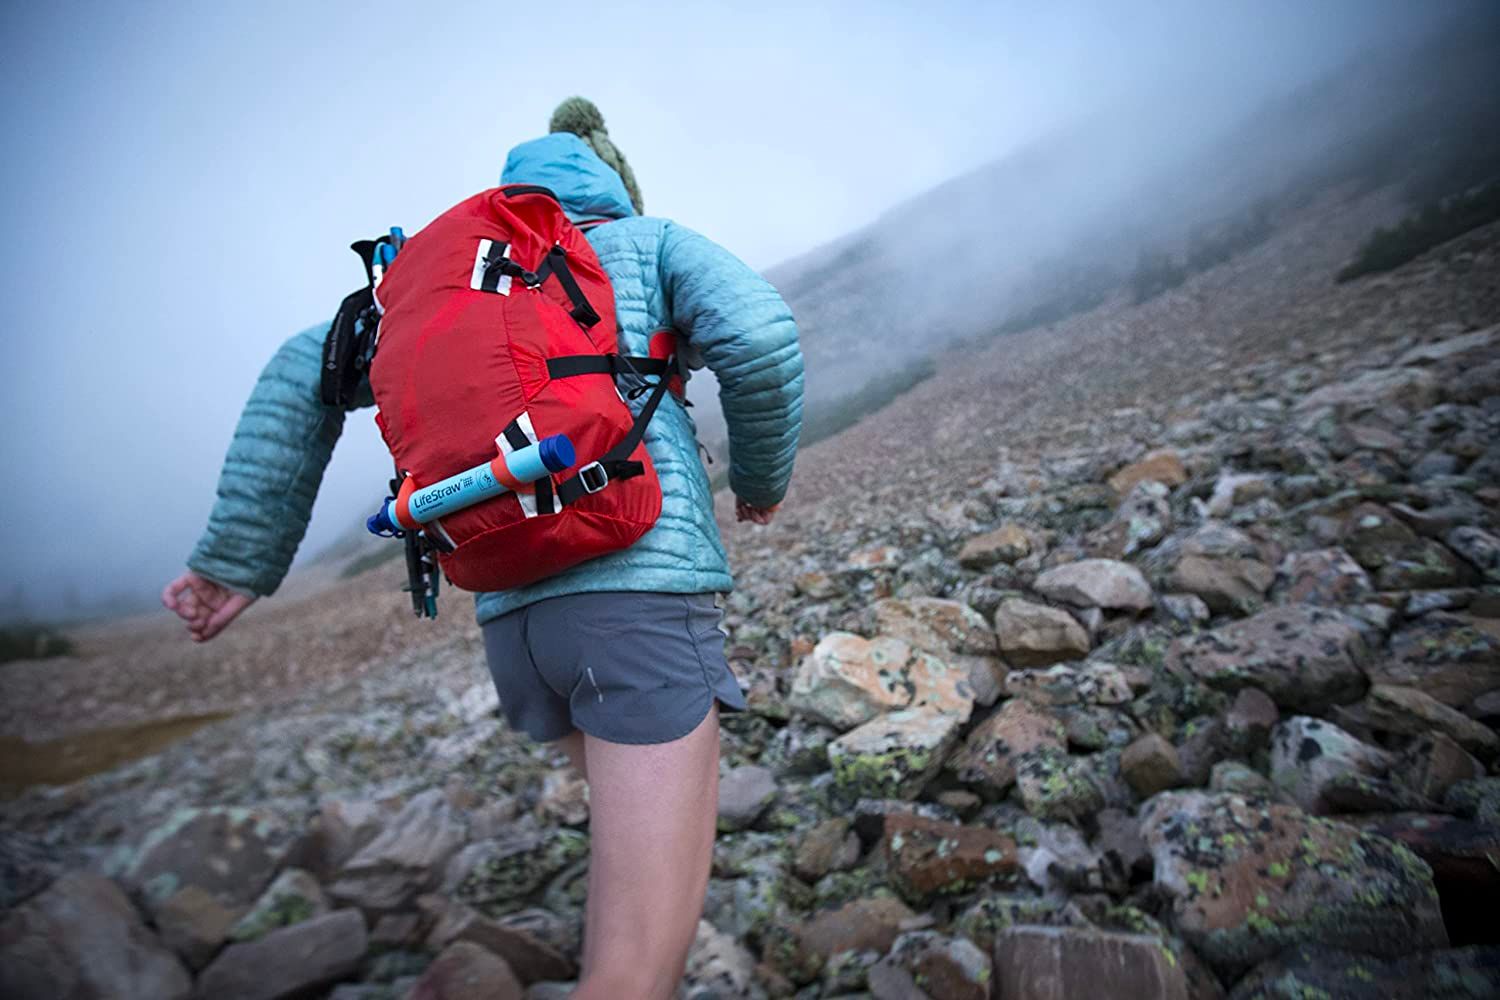 A hiker traverses rocky terrain with the best portable water filter option attached to their backpack